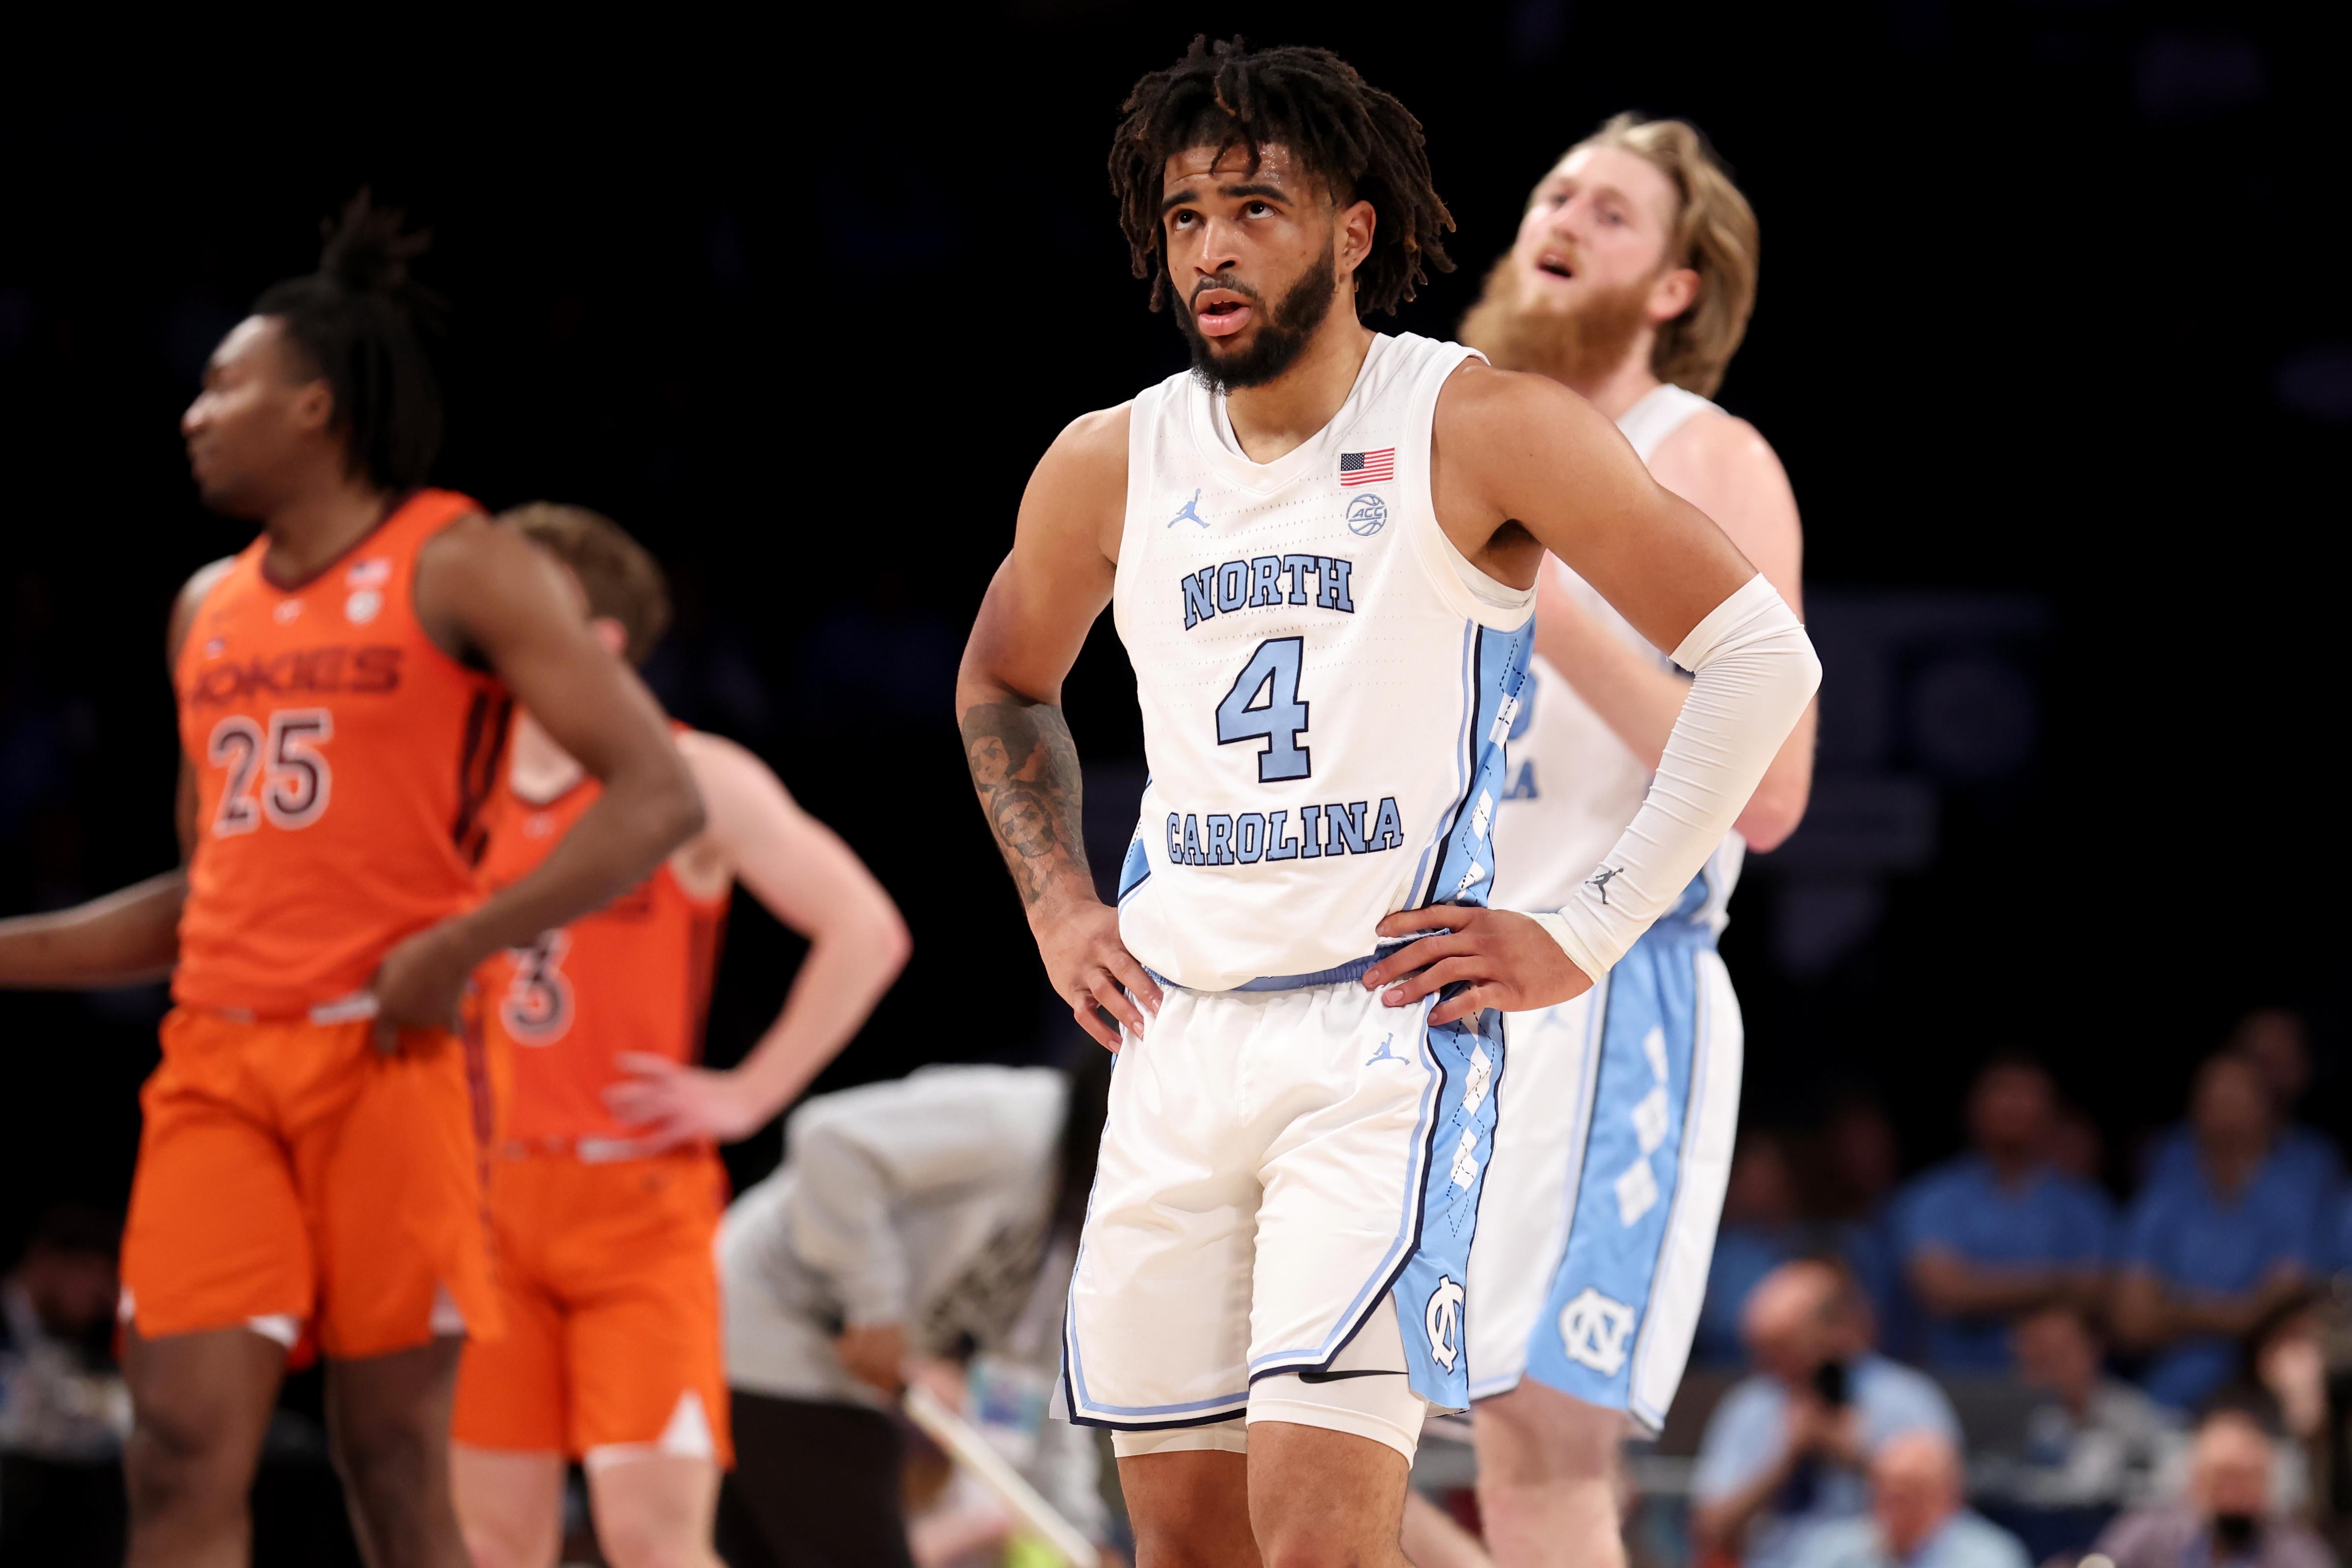 UNC March Madness Schedule: Next Game Time, Date, TV Channel for 2022 NCAA Basketball Tournament (Updated)